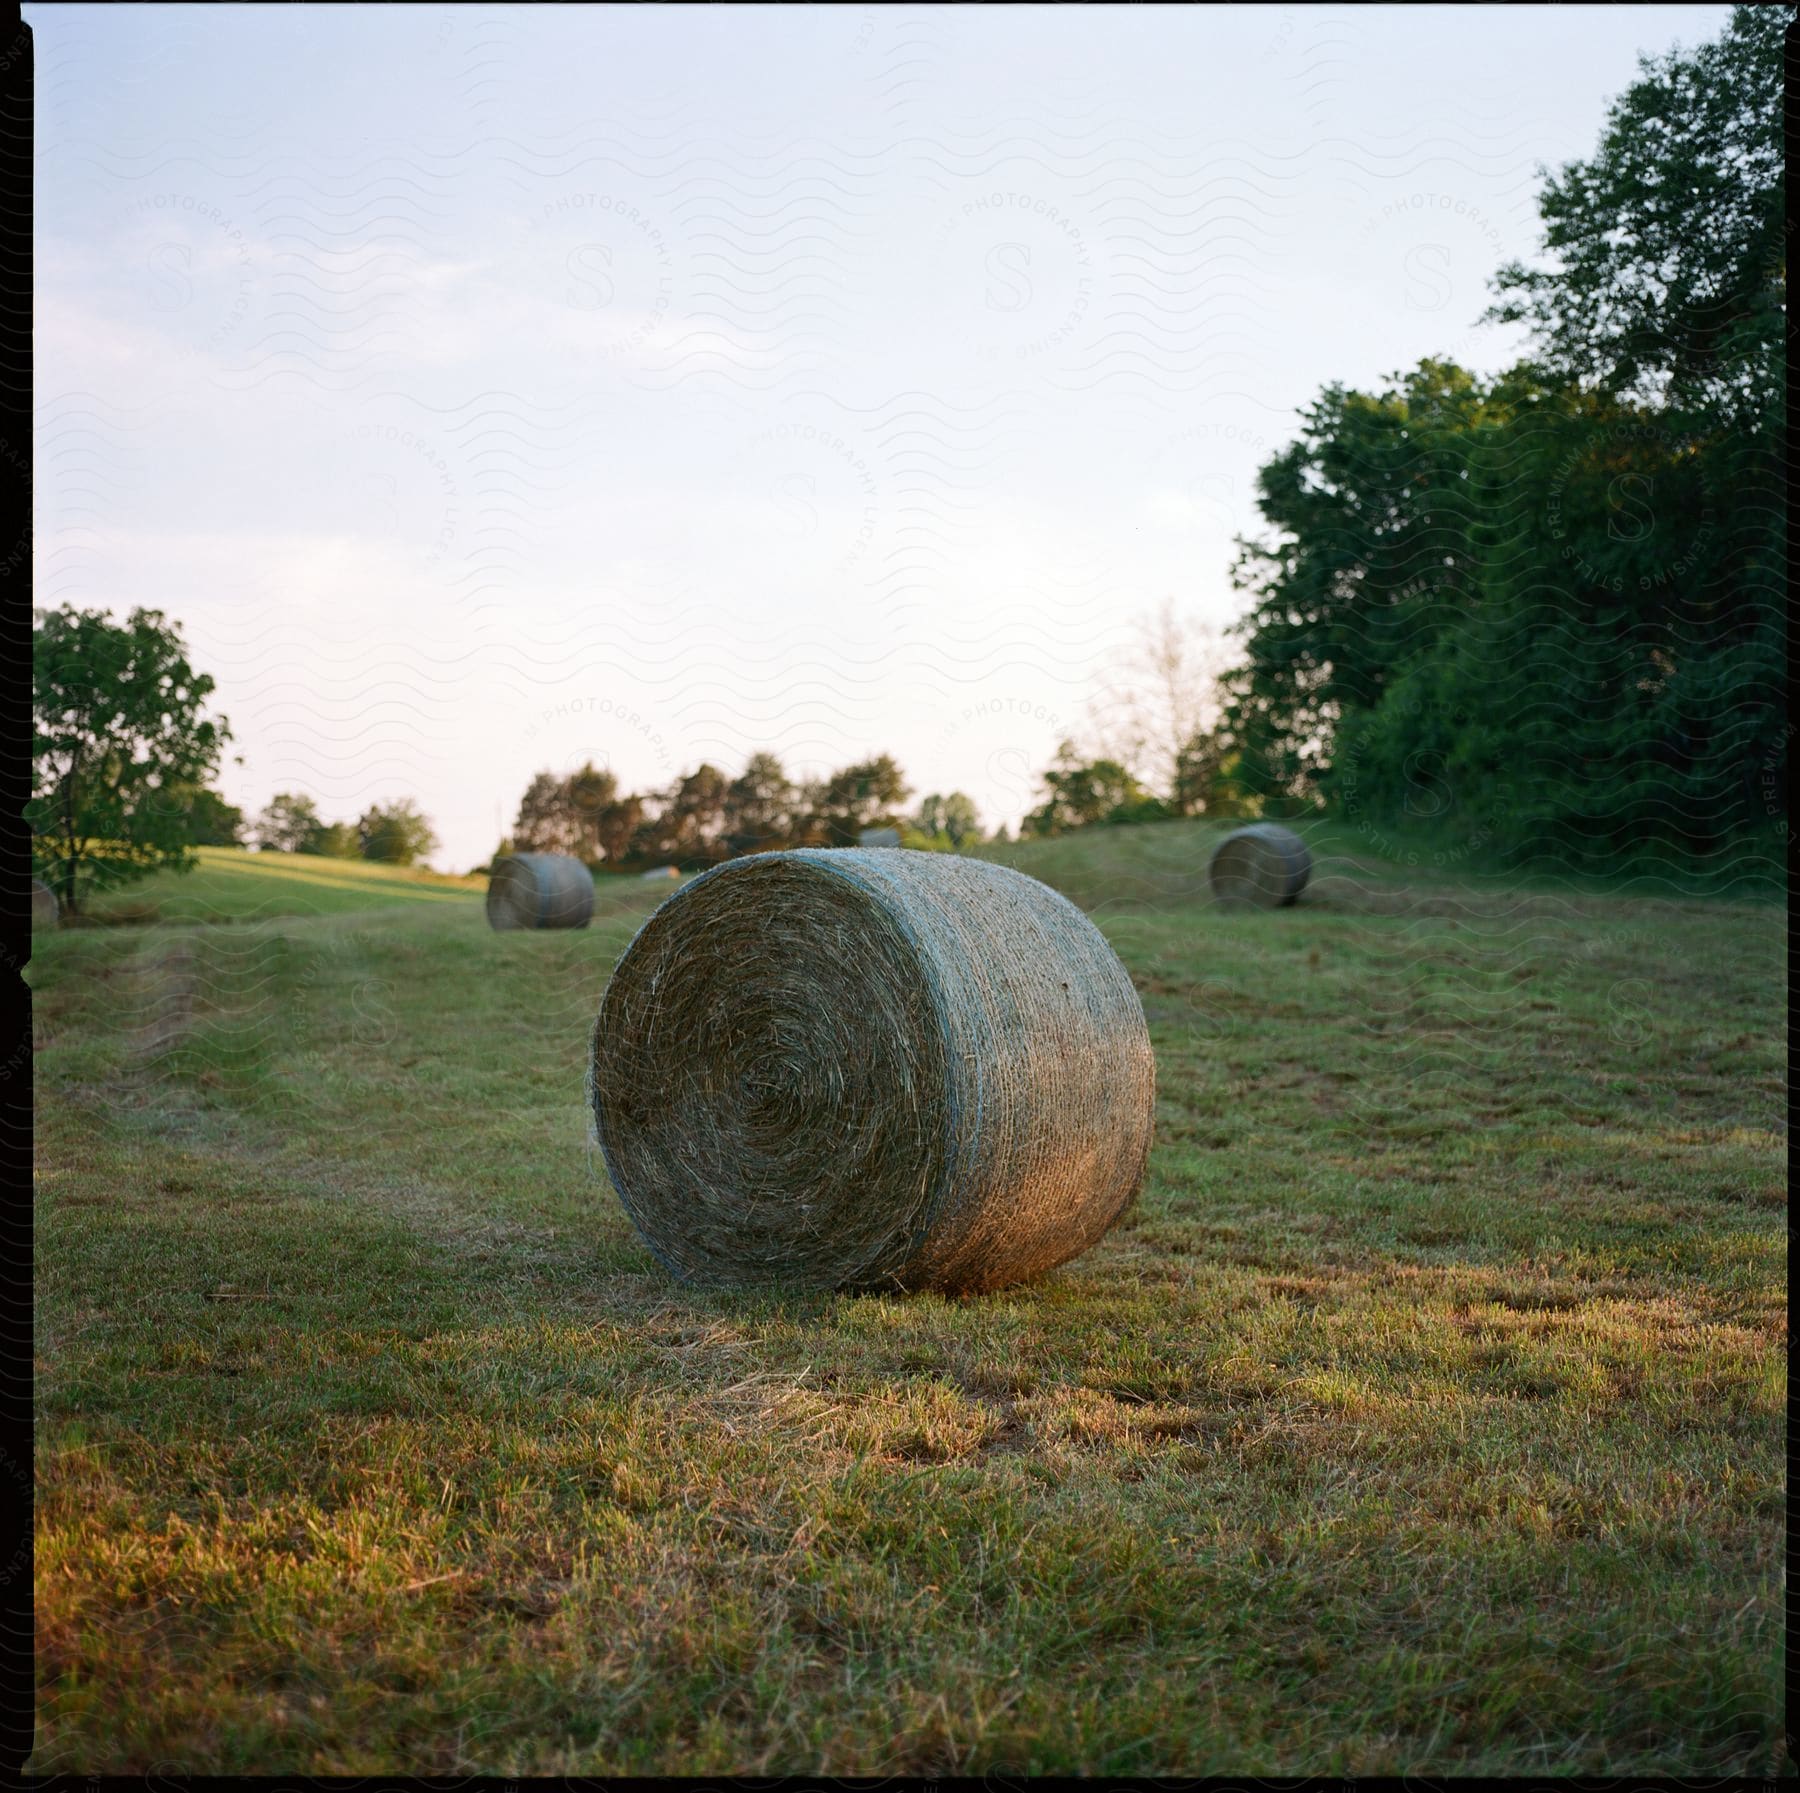 Bales of hay on grass near trees in a rural farm setting